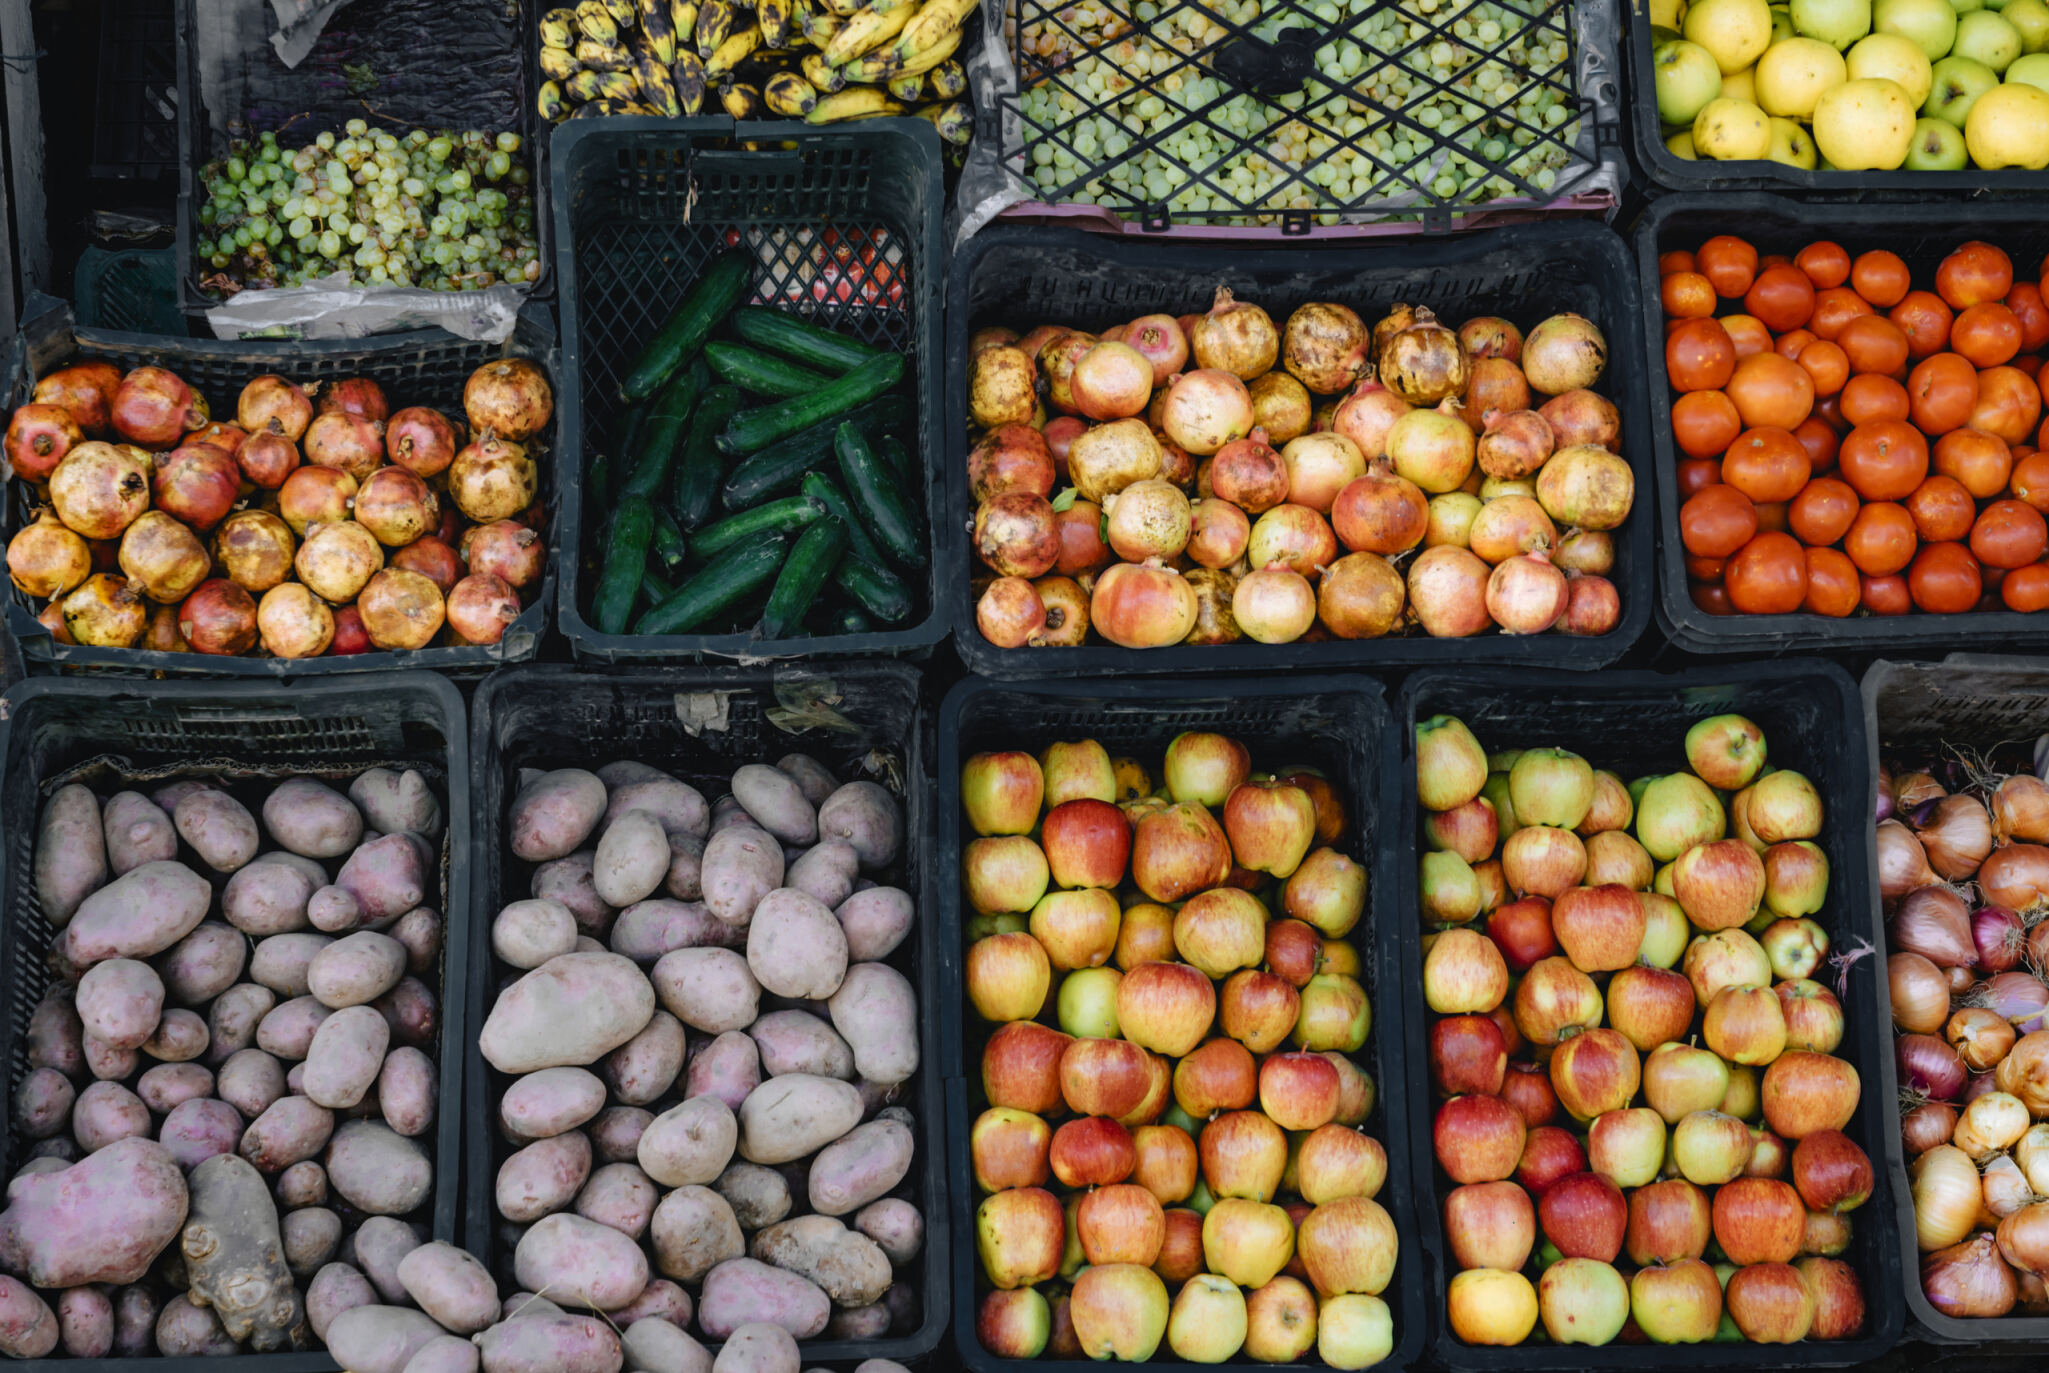 An image of a range of fruit and vegetables